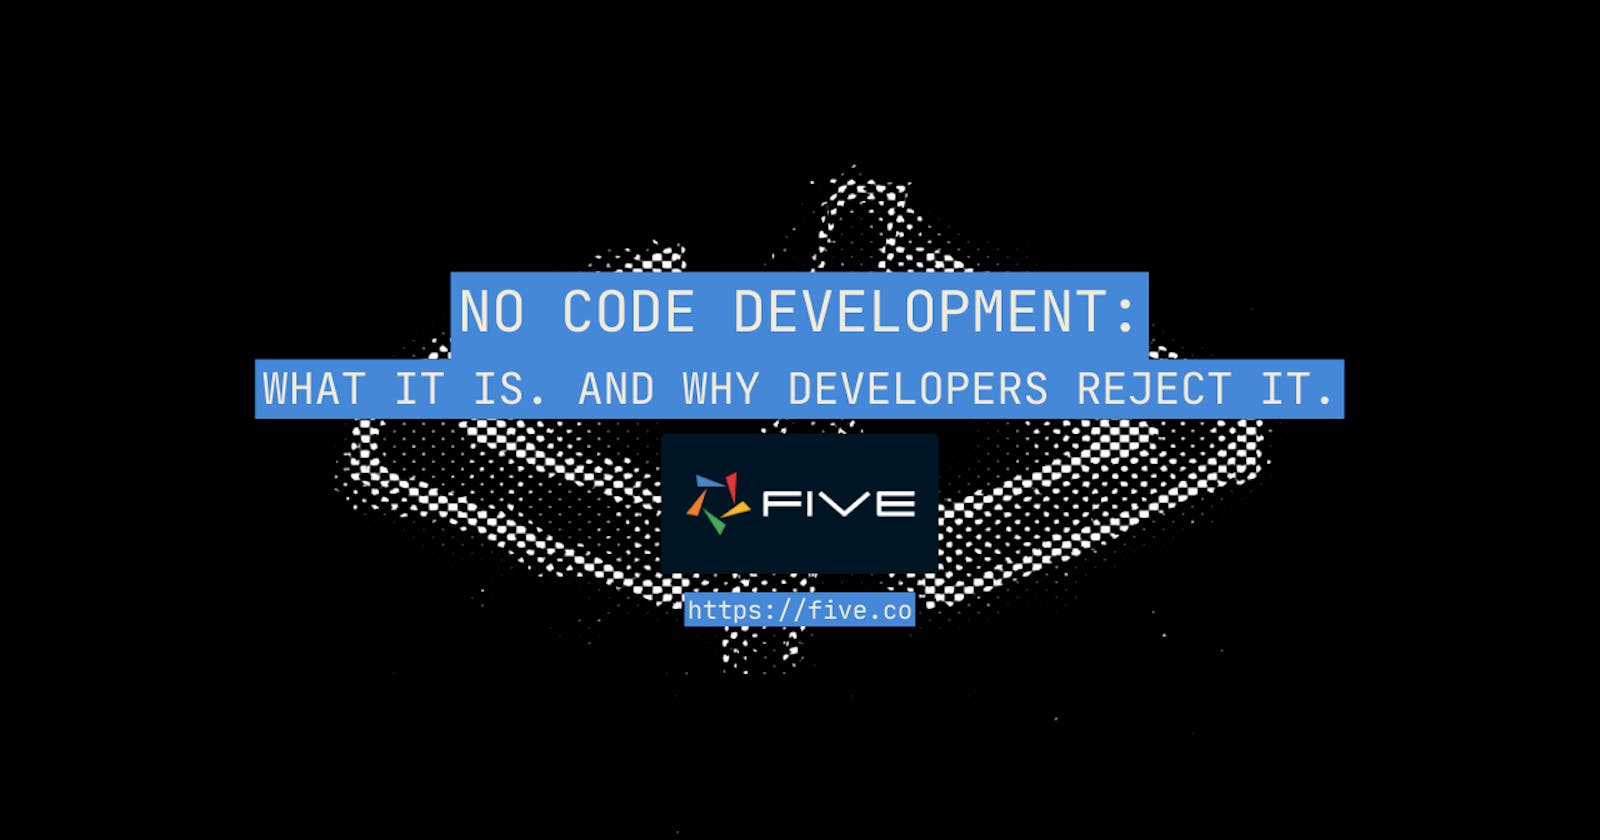 No Code Development: What It Is and Why Developers Reject It